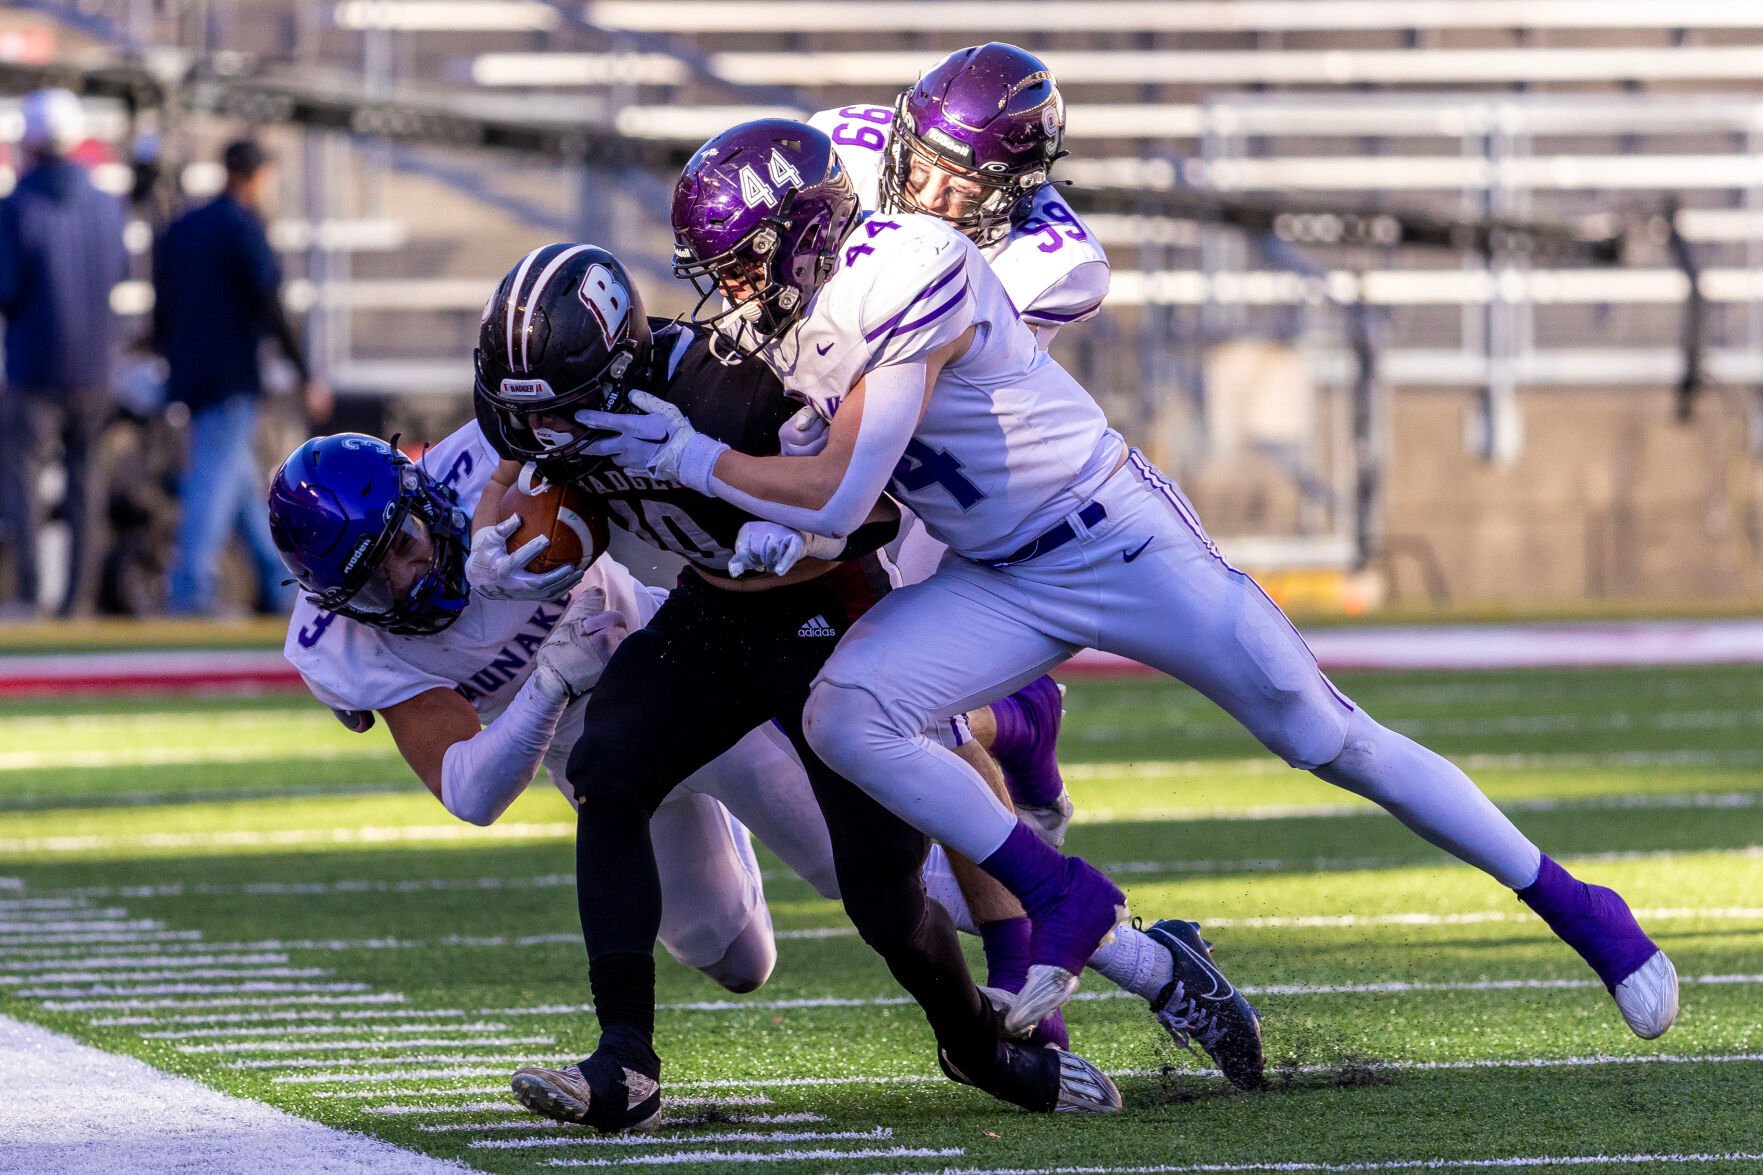 Waunakee Football: Heartbreak in WIAA Division 2 State Championship Game